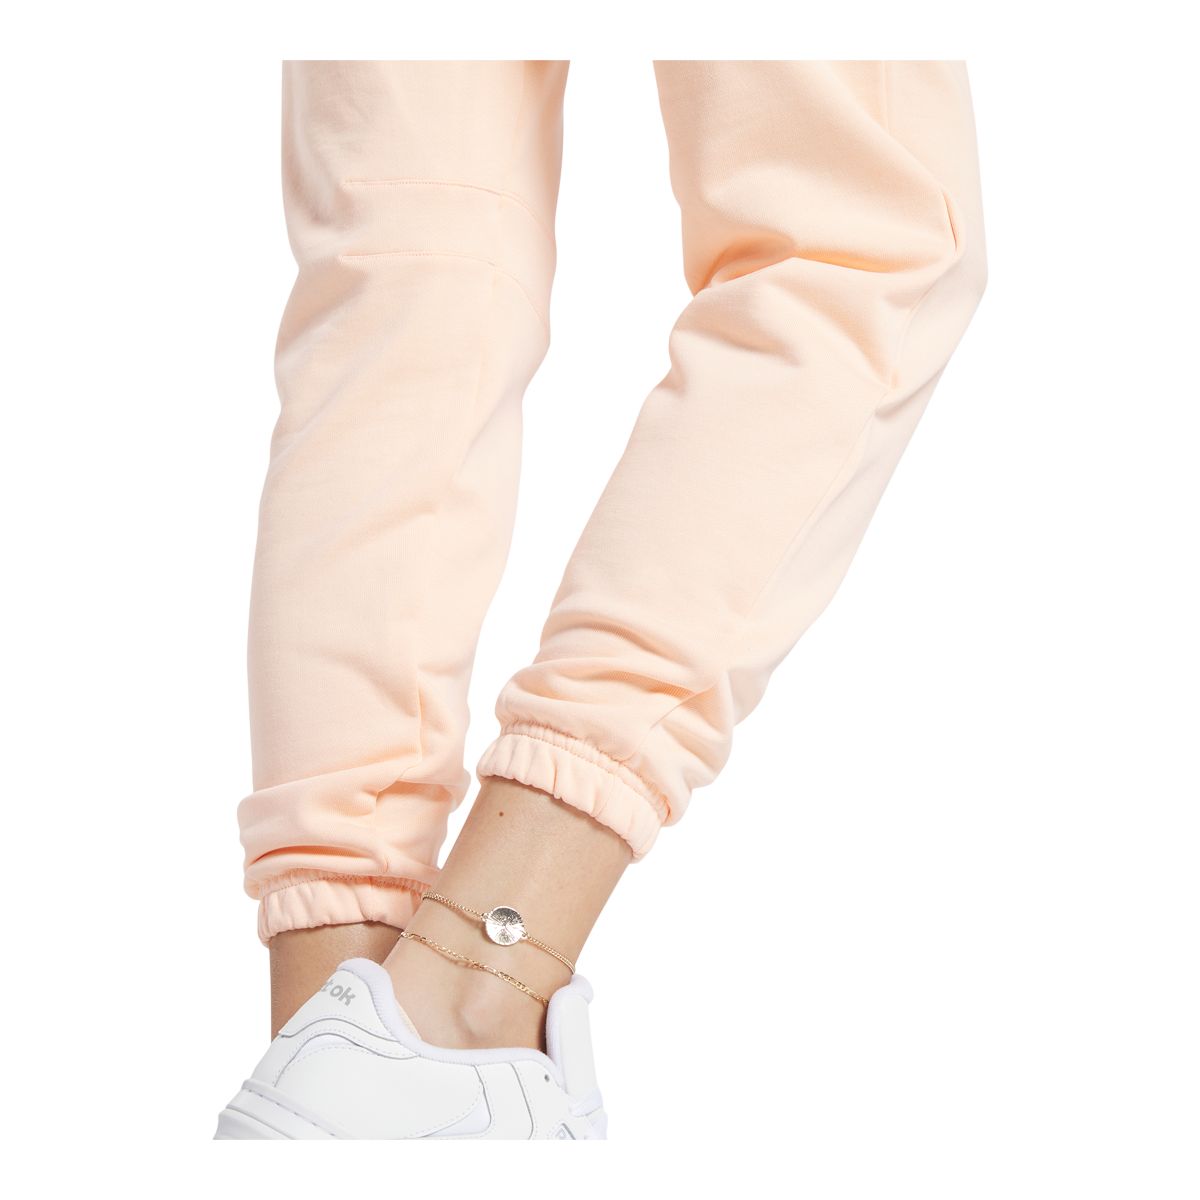 Reebok Women's Classics Wide Cotton French Terry Jogger Pants